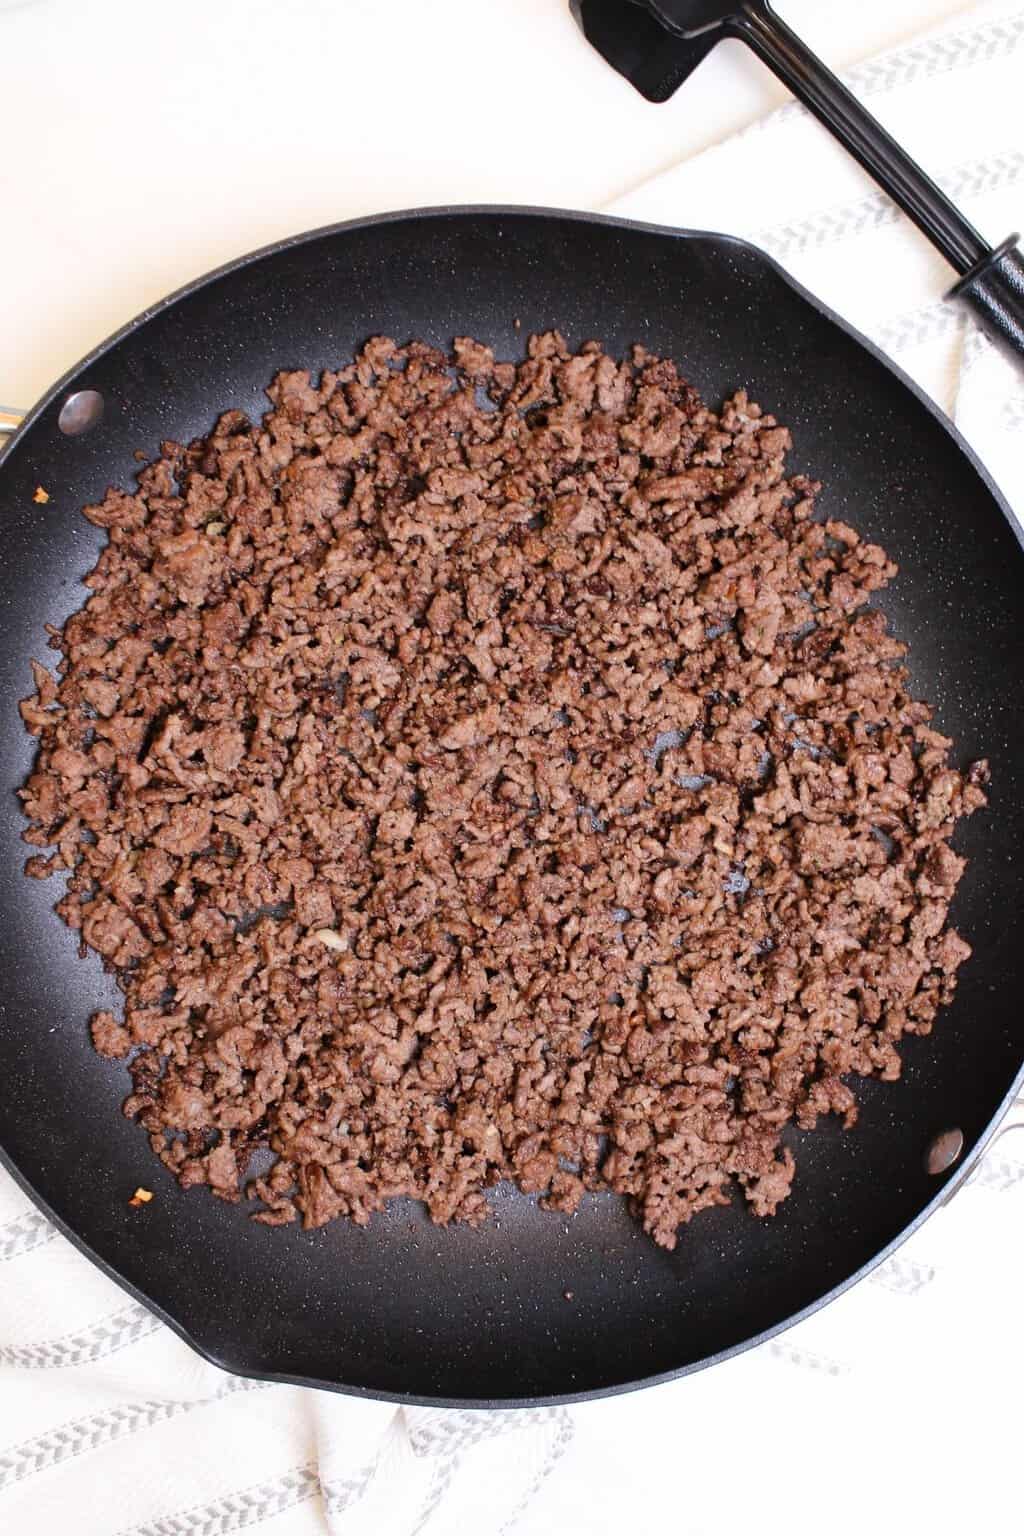 Ground beef or lamb being cooked in a skillet.